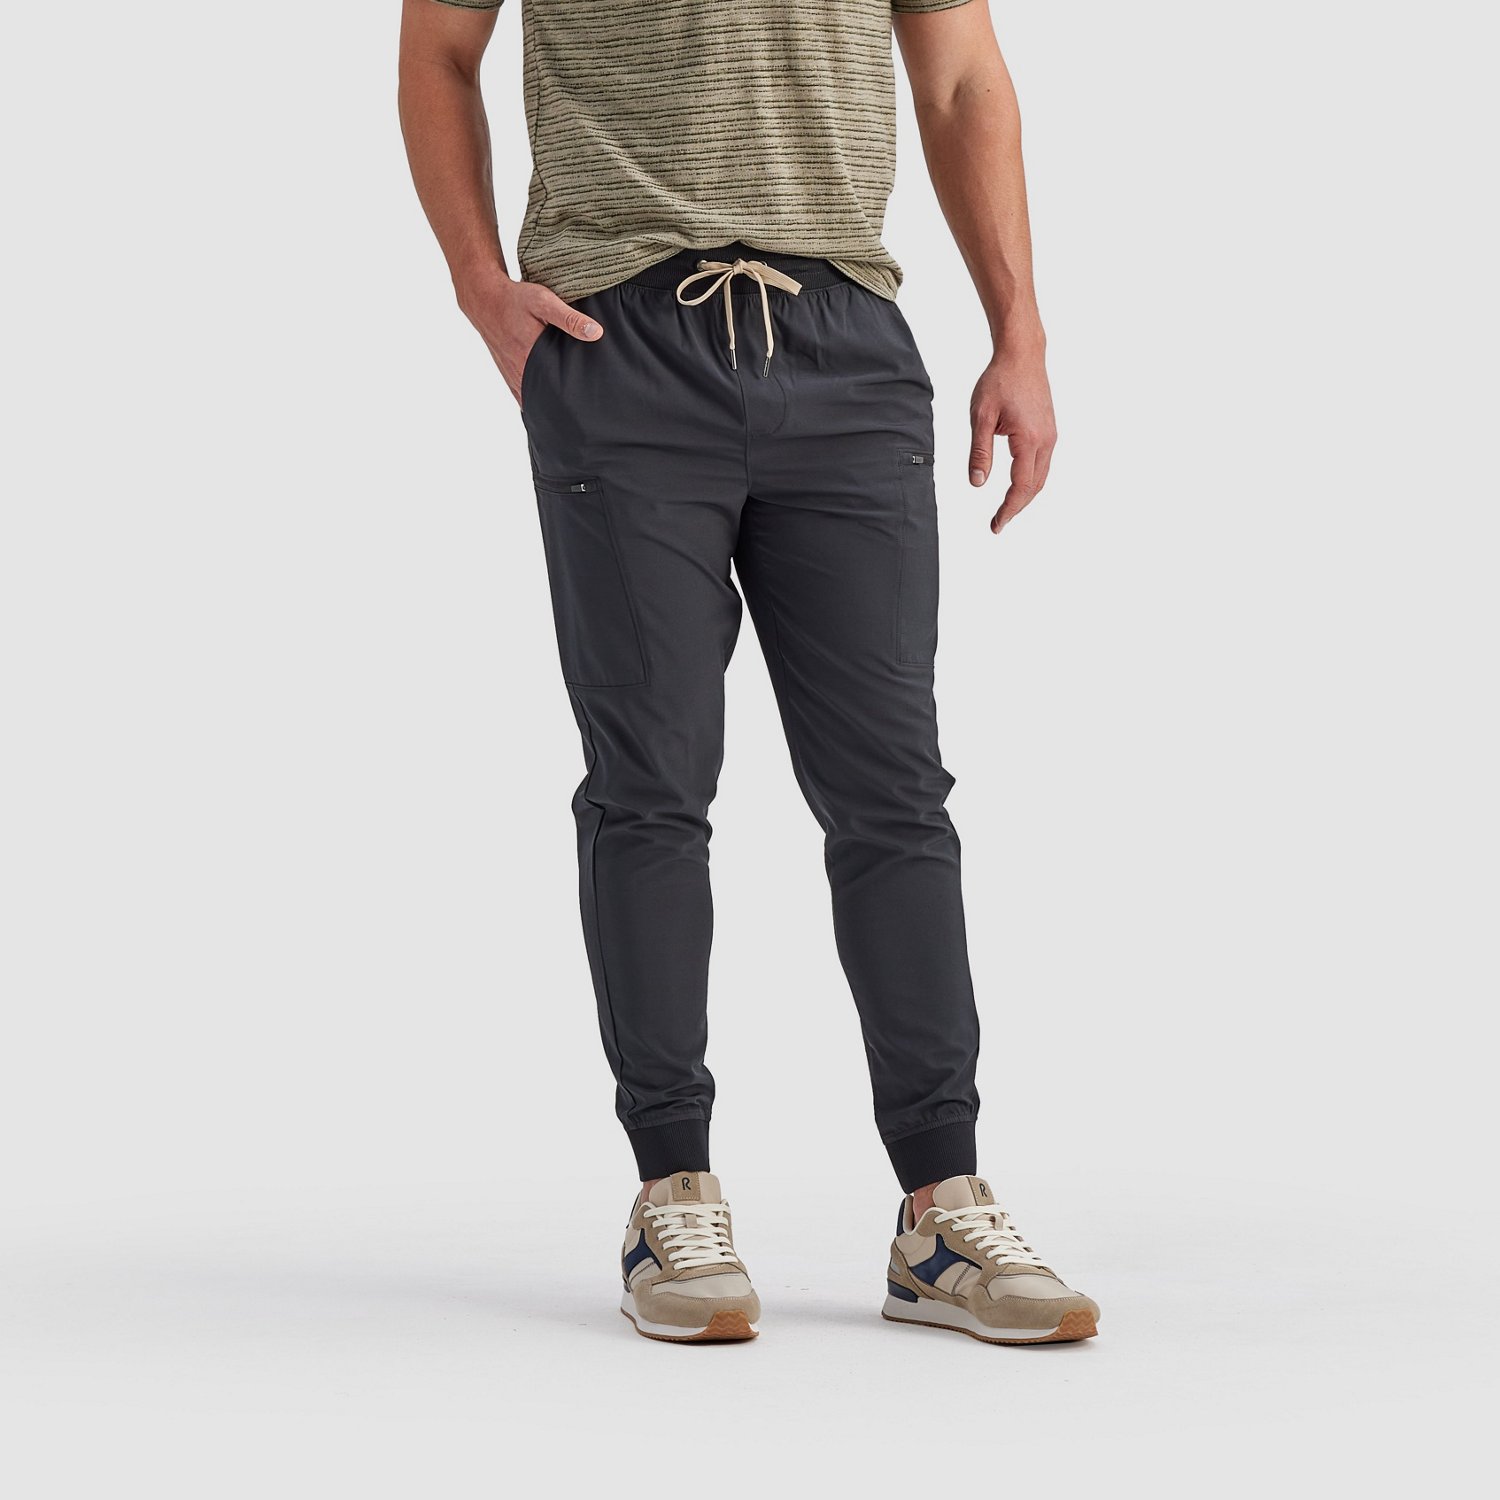 R.O.W. Men's Austin Joggers | Free Shipping at Academy